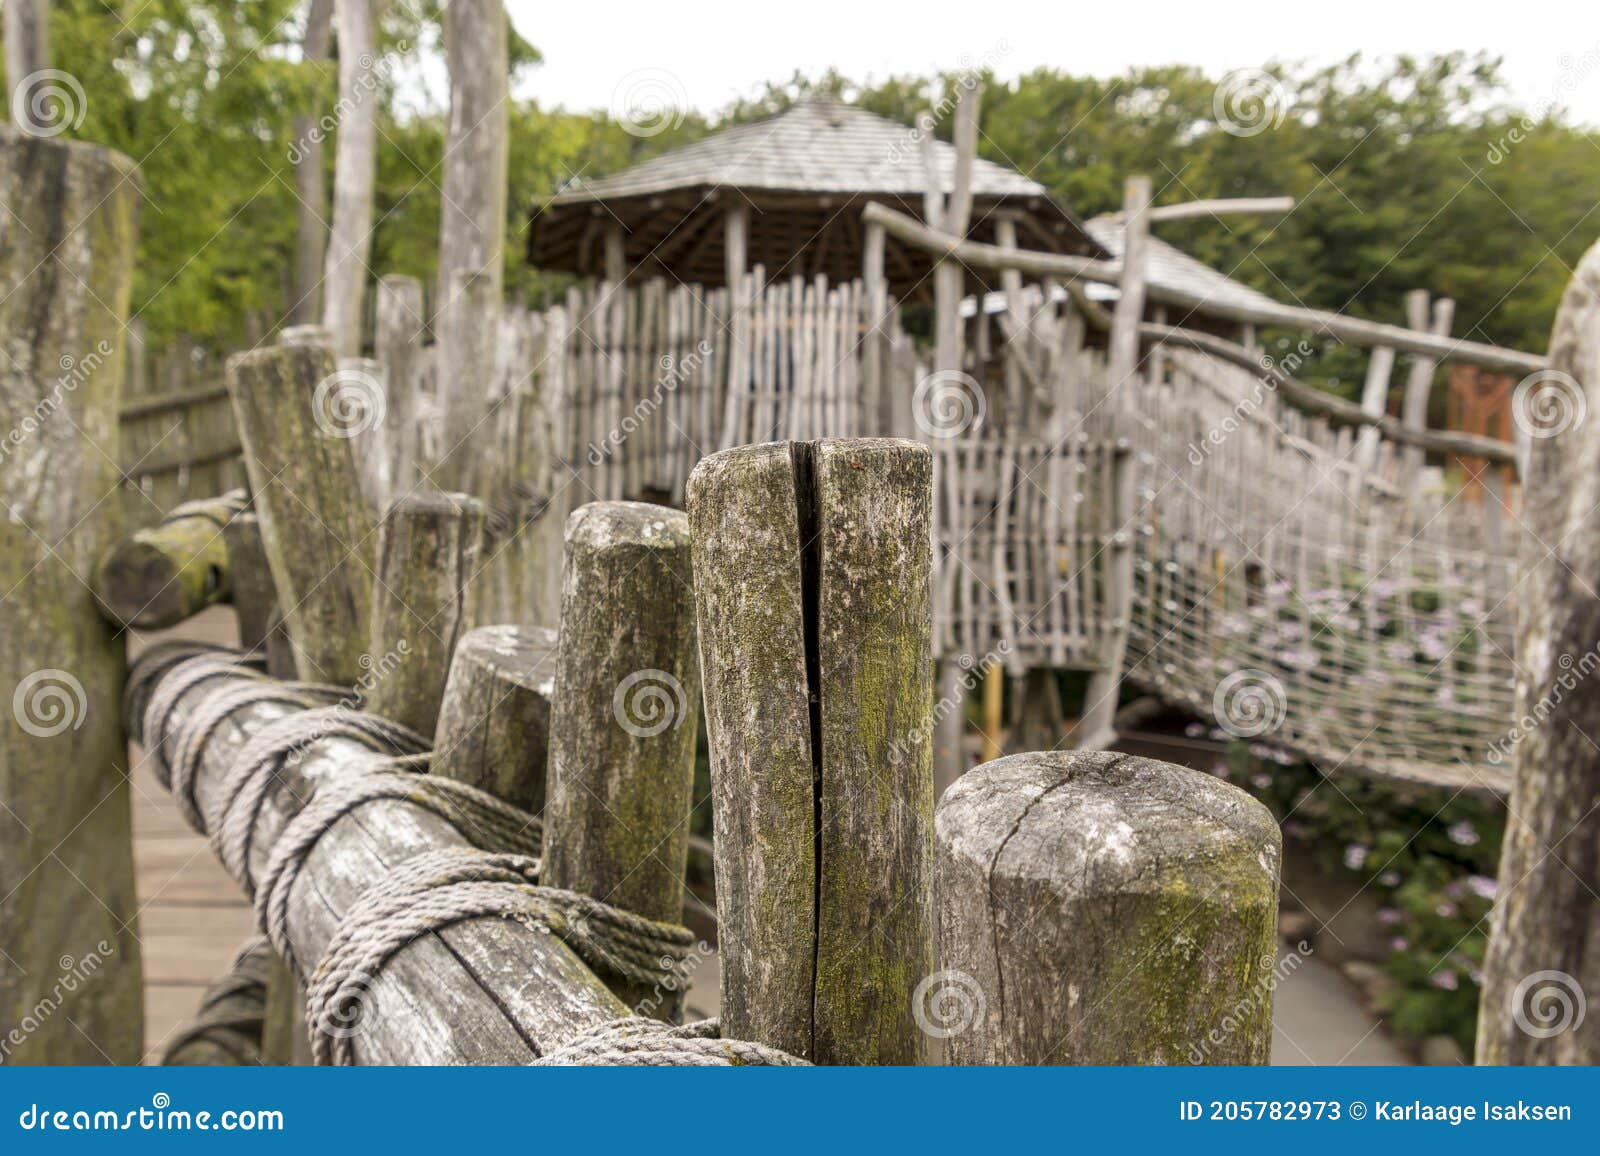 Old Wooden Cabins with a Suspension Bridge Made of Rope and Wood